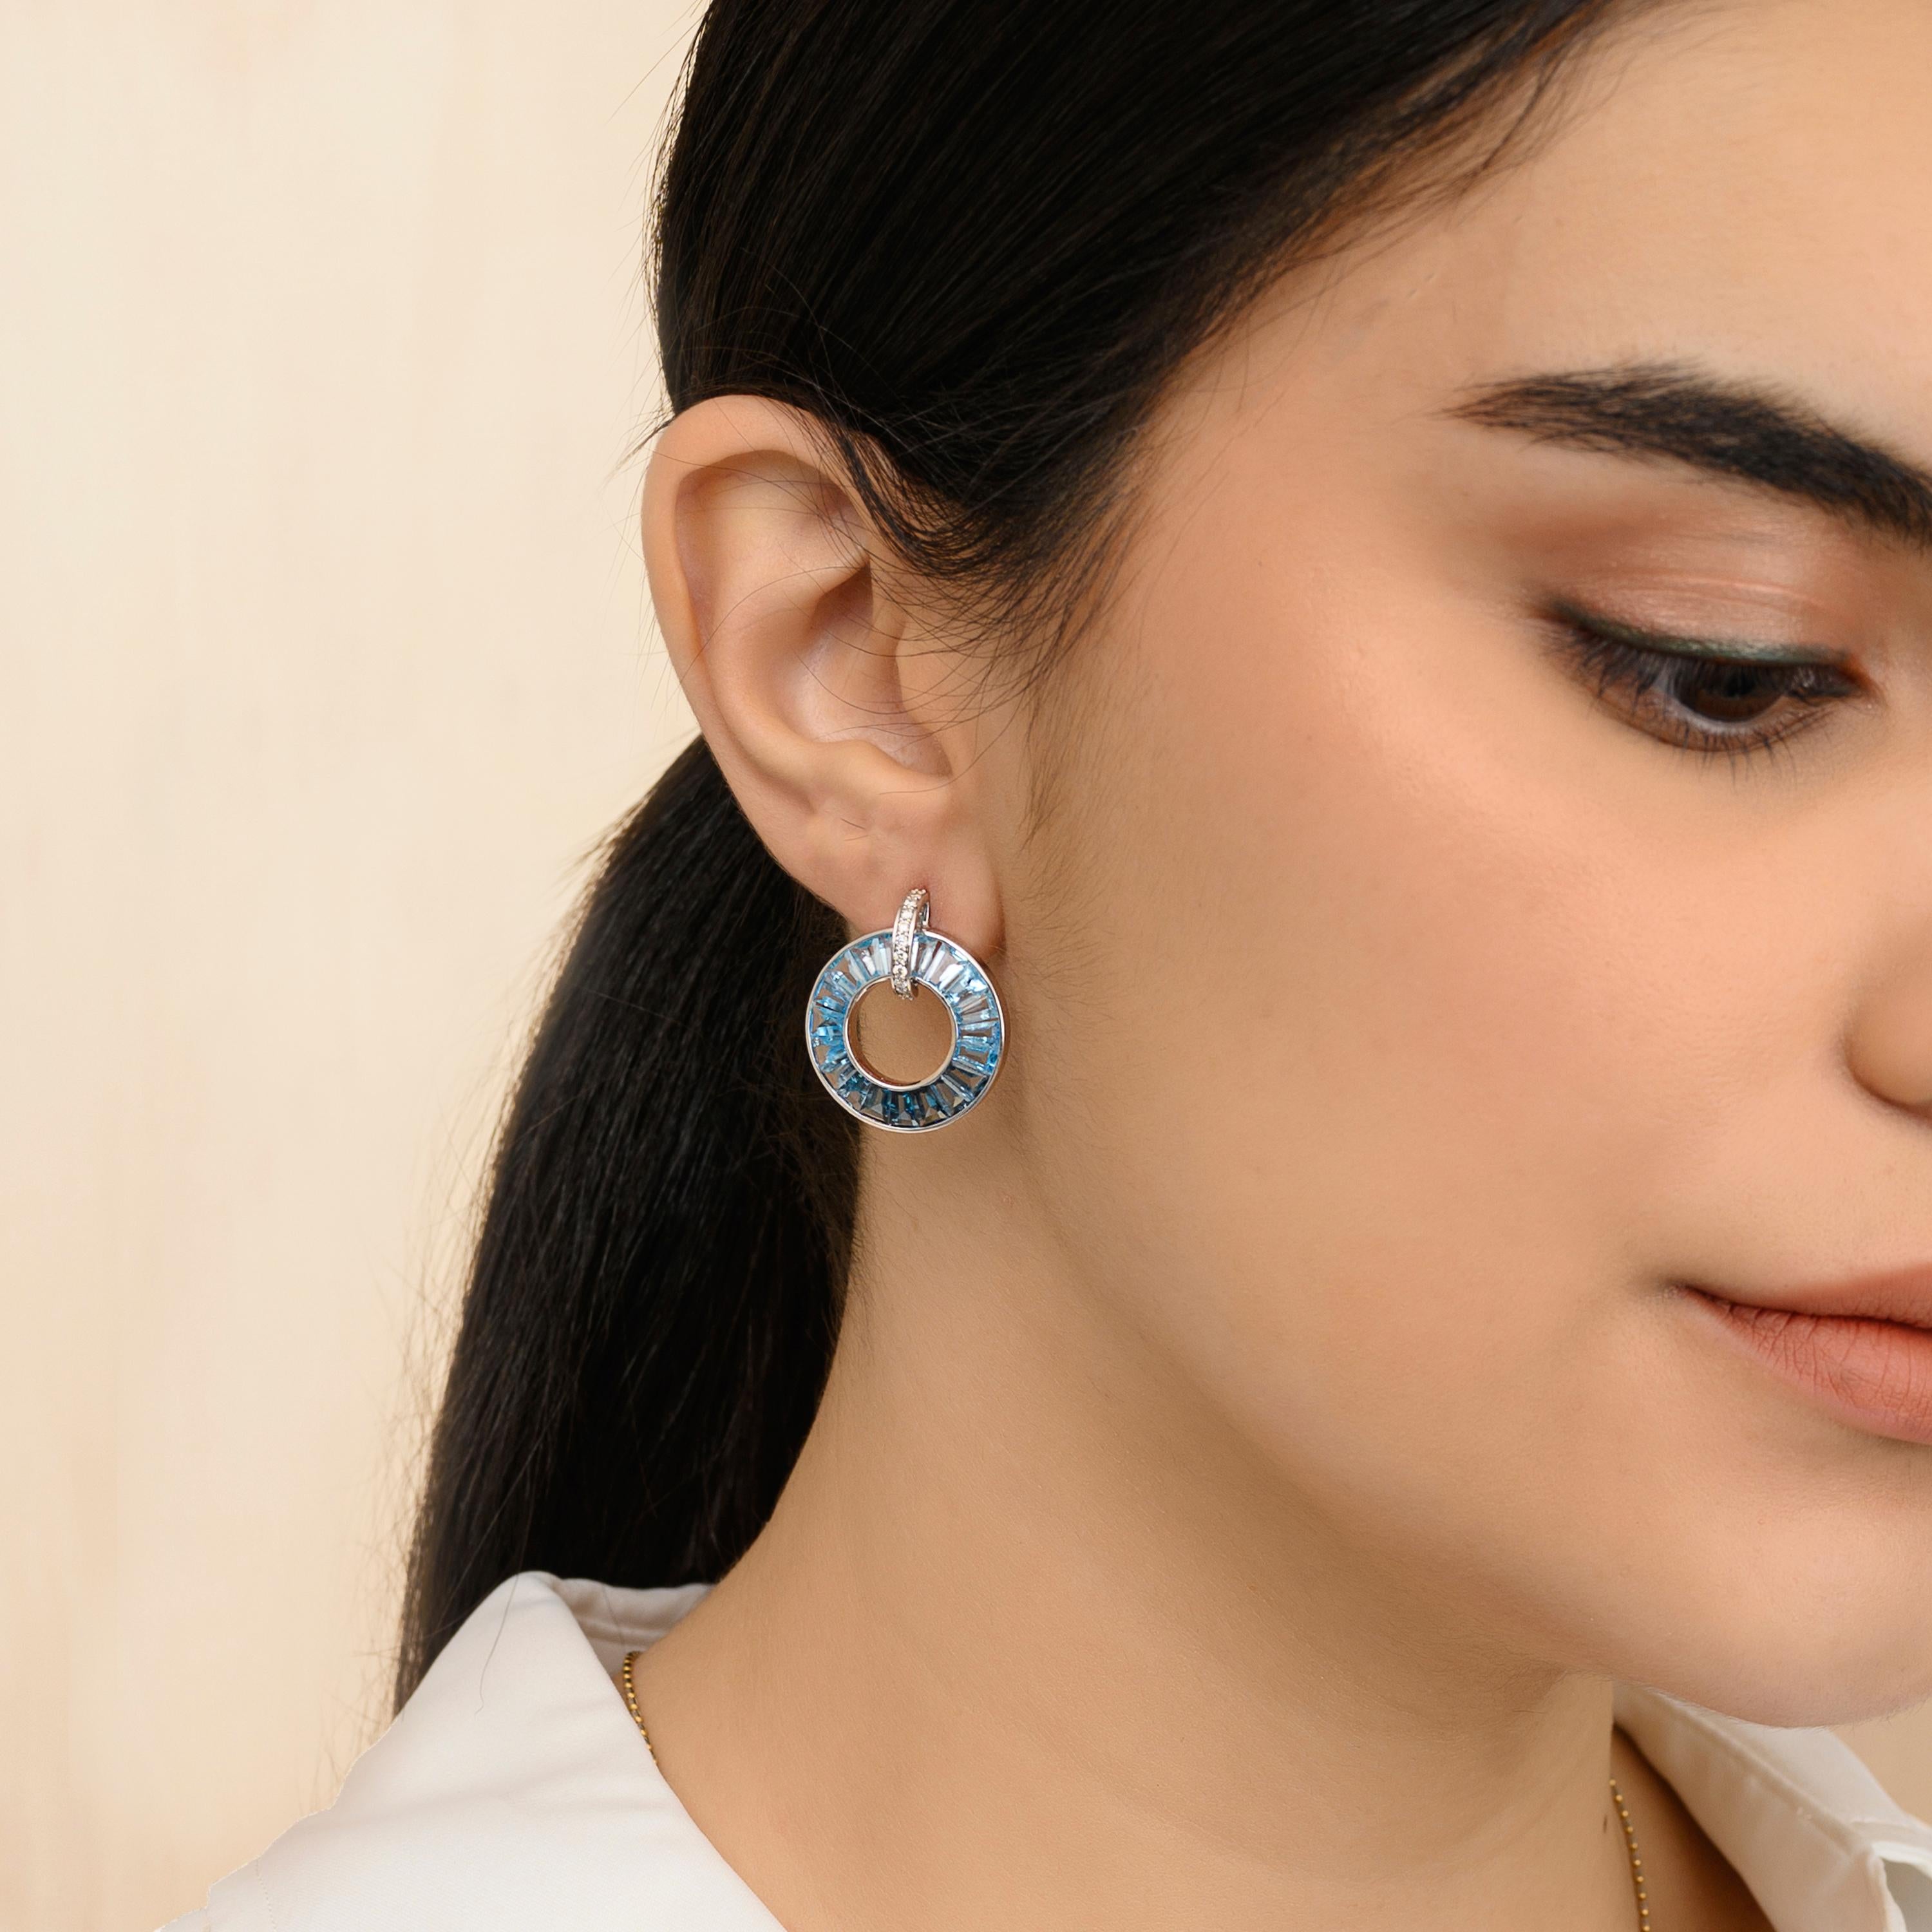 These absolutely stunning 18K White Gold Blue Topaz Diamond Circle Earrings is a symphony of elegance and sophistication. Crafted in radiant white gold, these earrings showcase the mesmerizing beauty of three types of blue topaz gemstones: Sky,